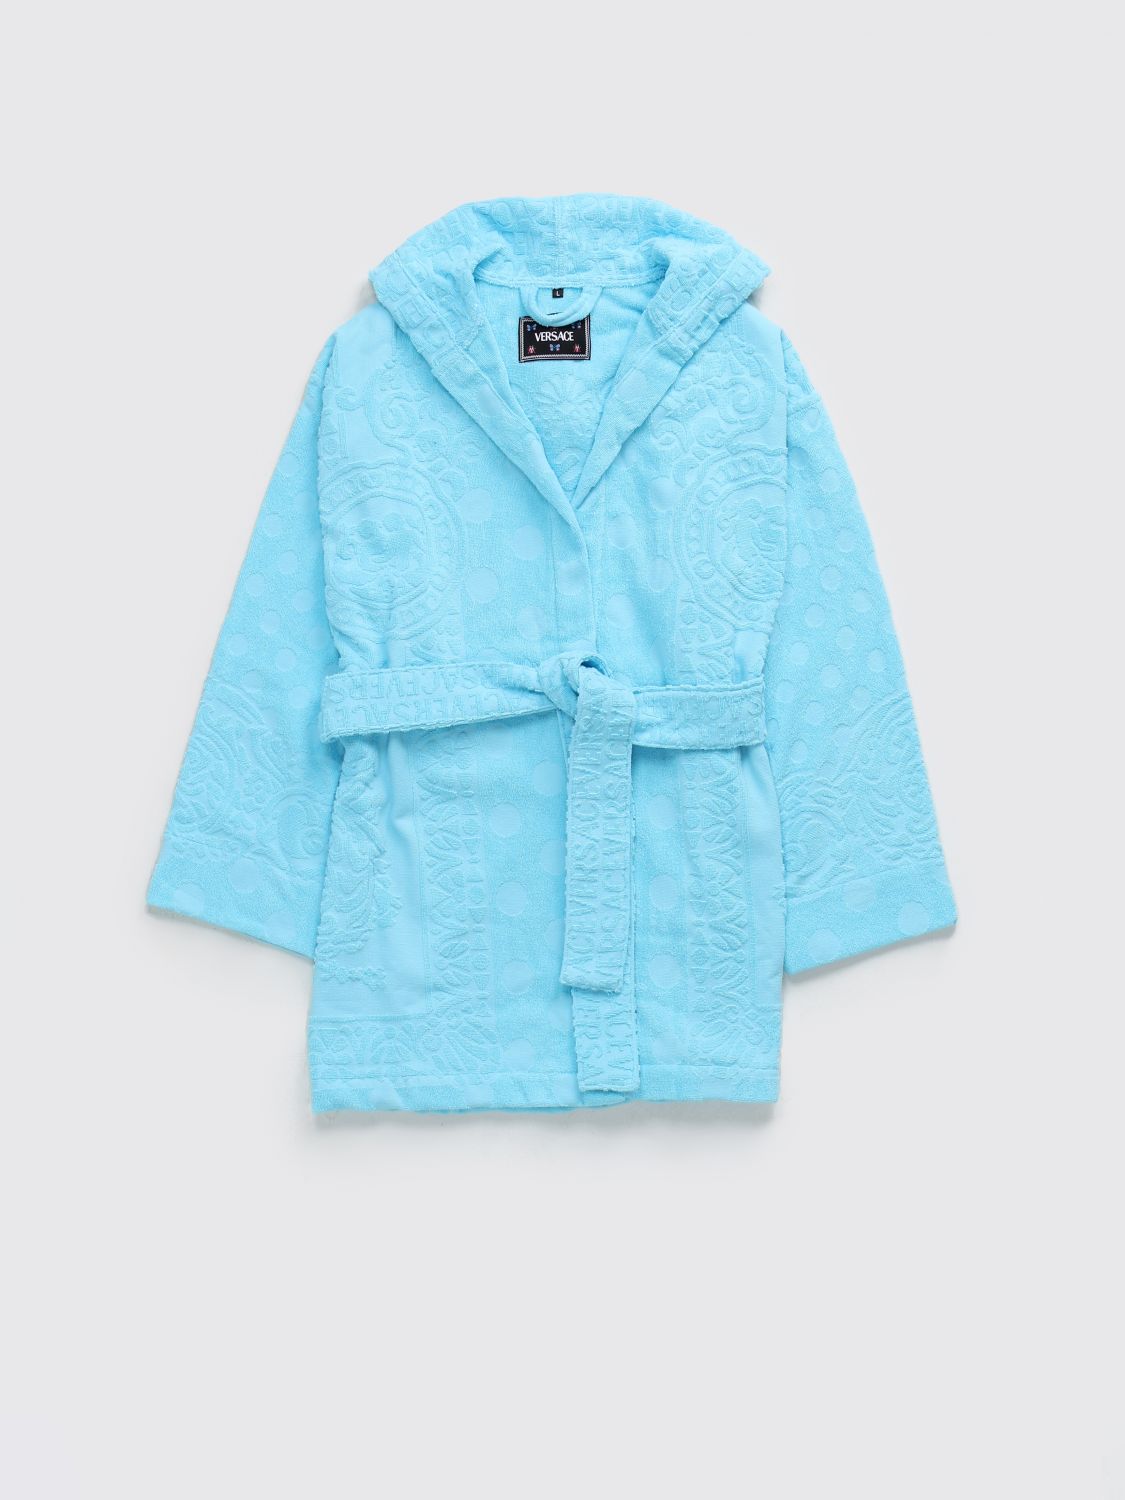 Versace Home Bathrobes VERSACE HOME Lifestyle colour Gnawed Blue